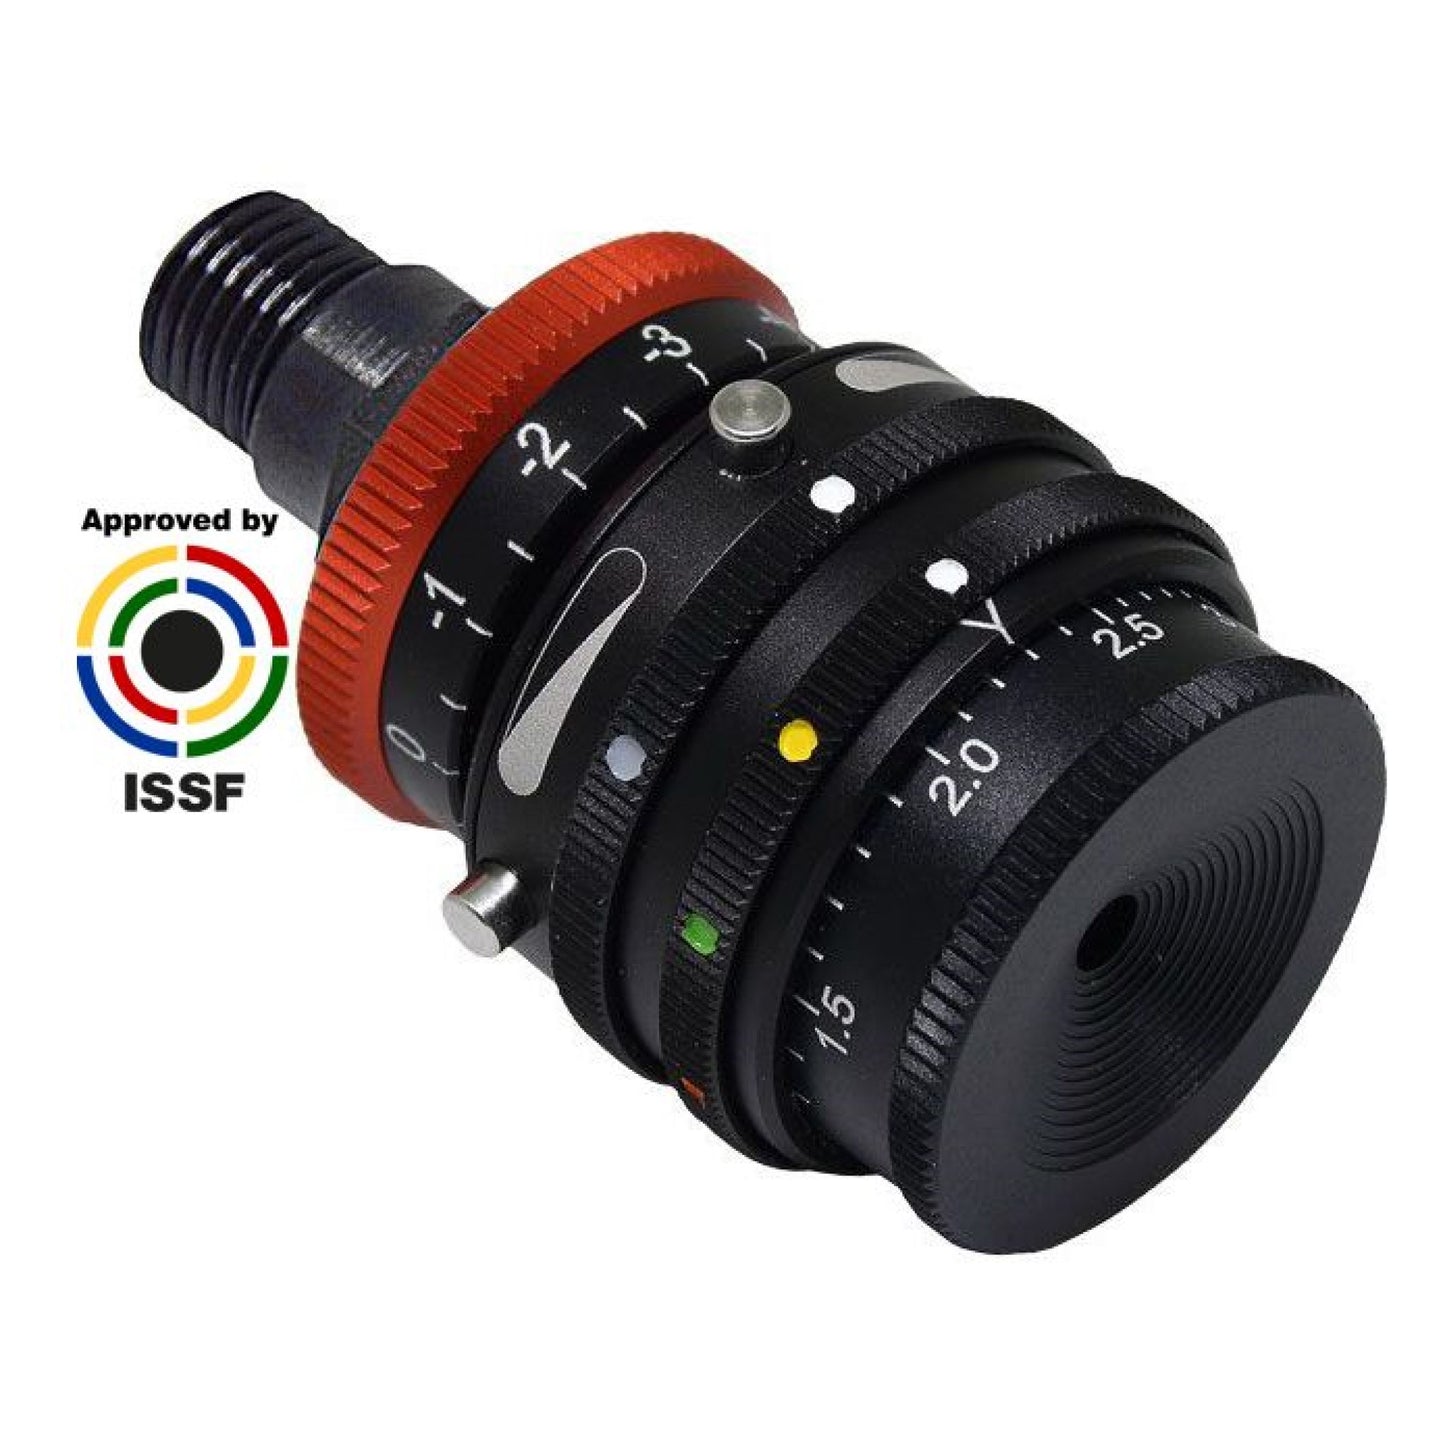 Gehmann 575-0 Rearsight Iris with Diopter 0.0x, 6 Colour Filter & Twin Polariser